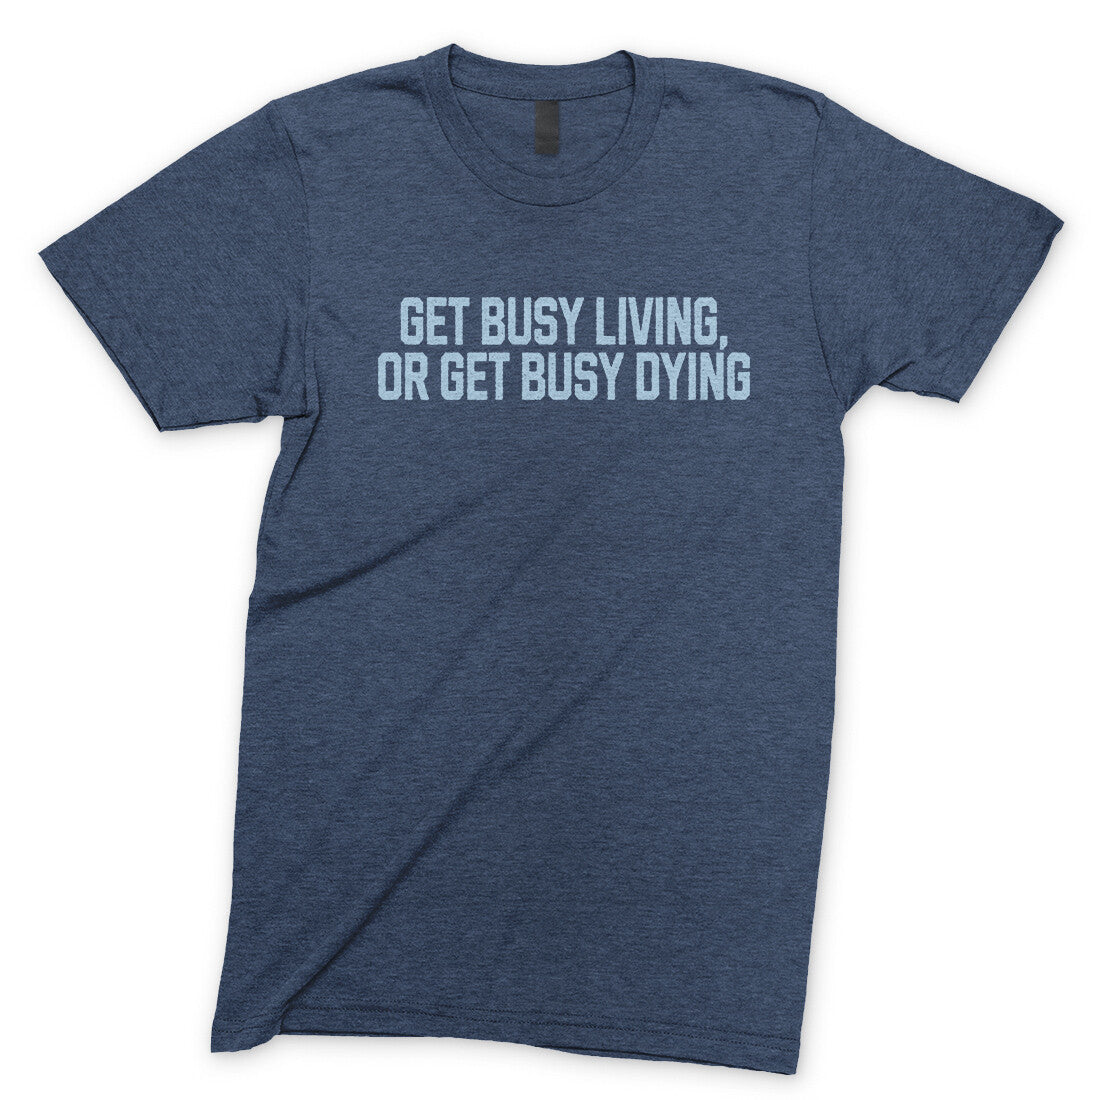 Get Busy Living or Get Busy Dying in Navy Heather Color